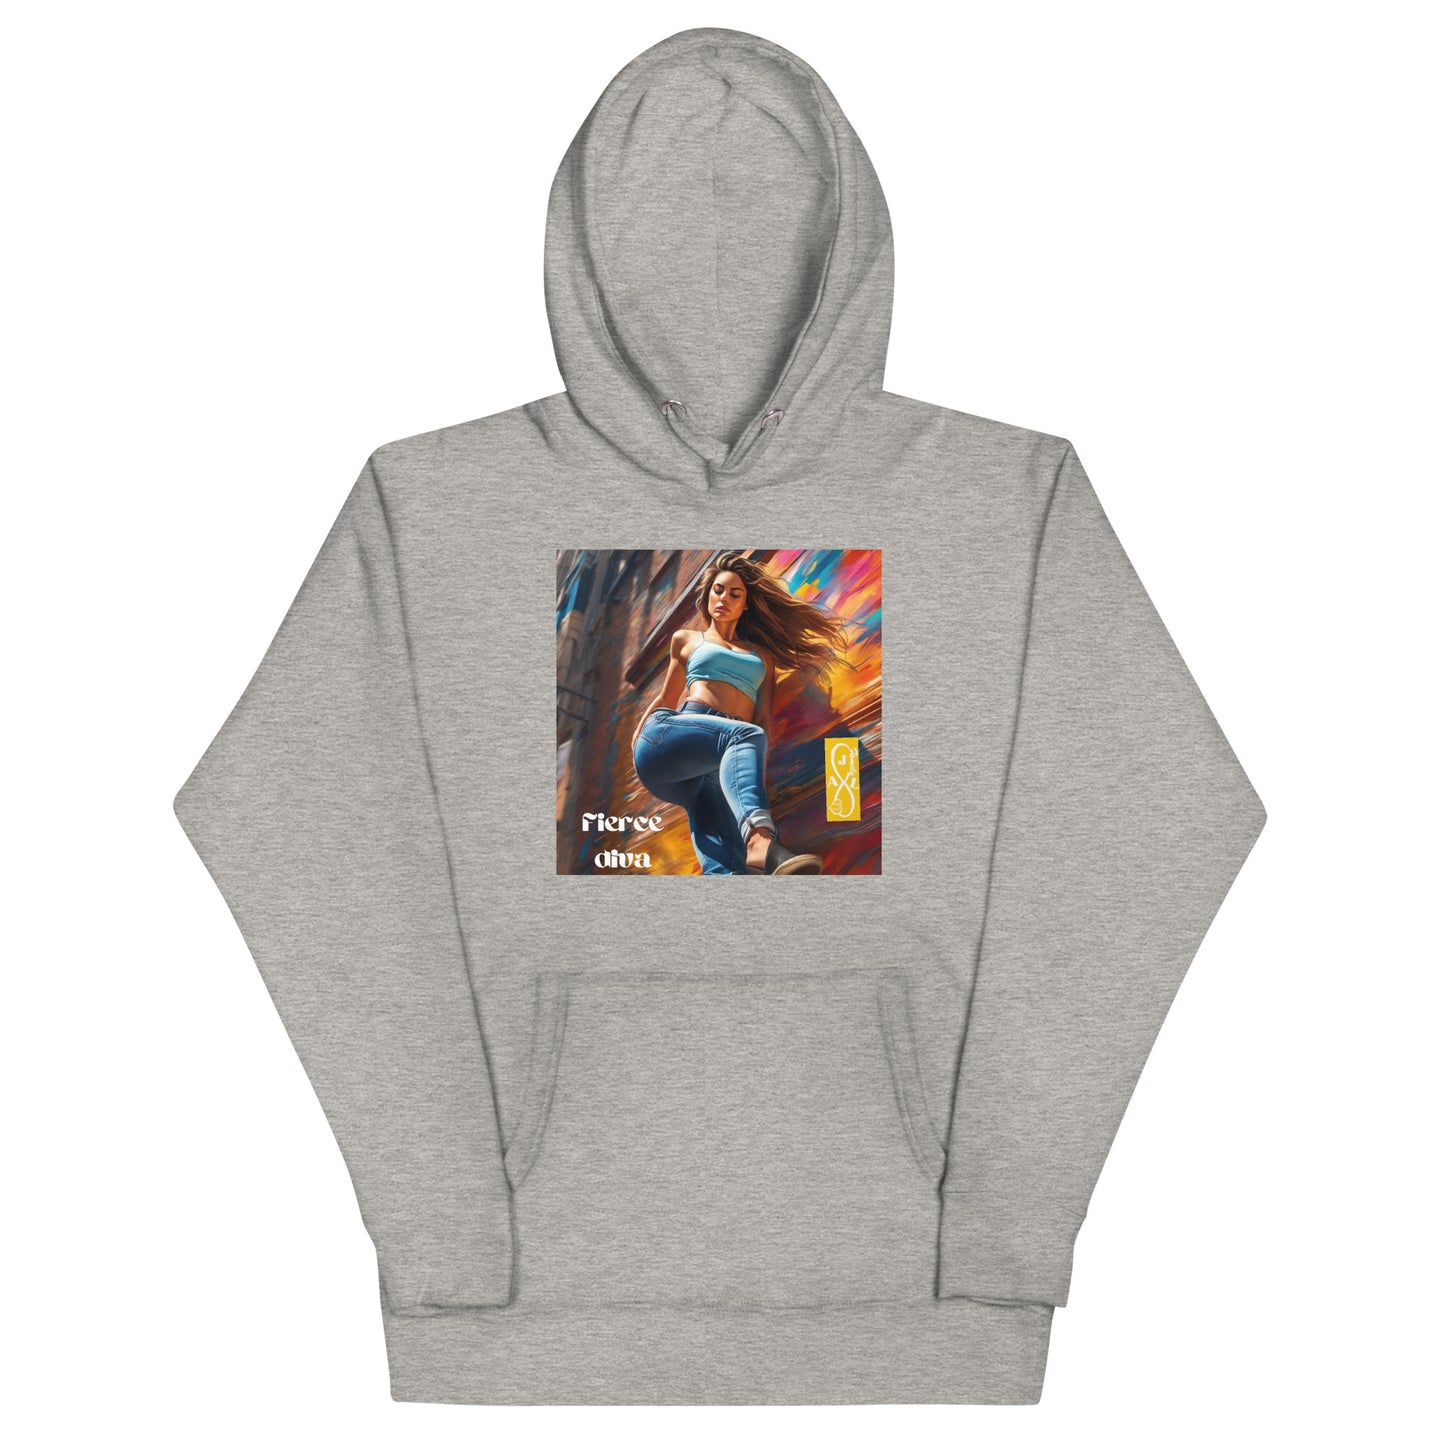 AJL Collection Woman’s Pullover Hoodie